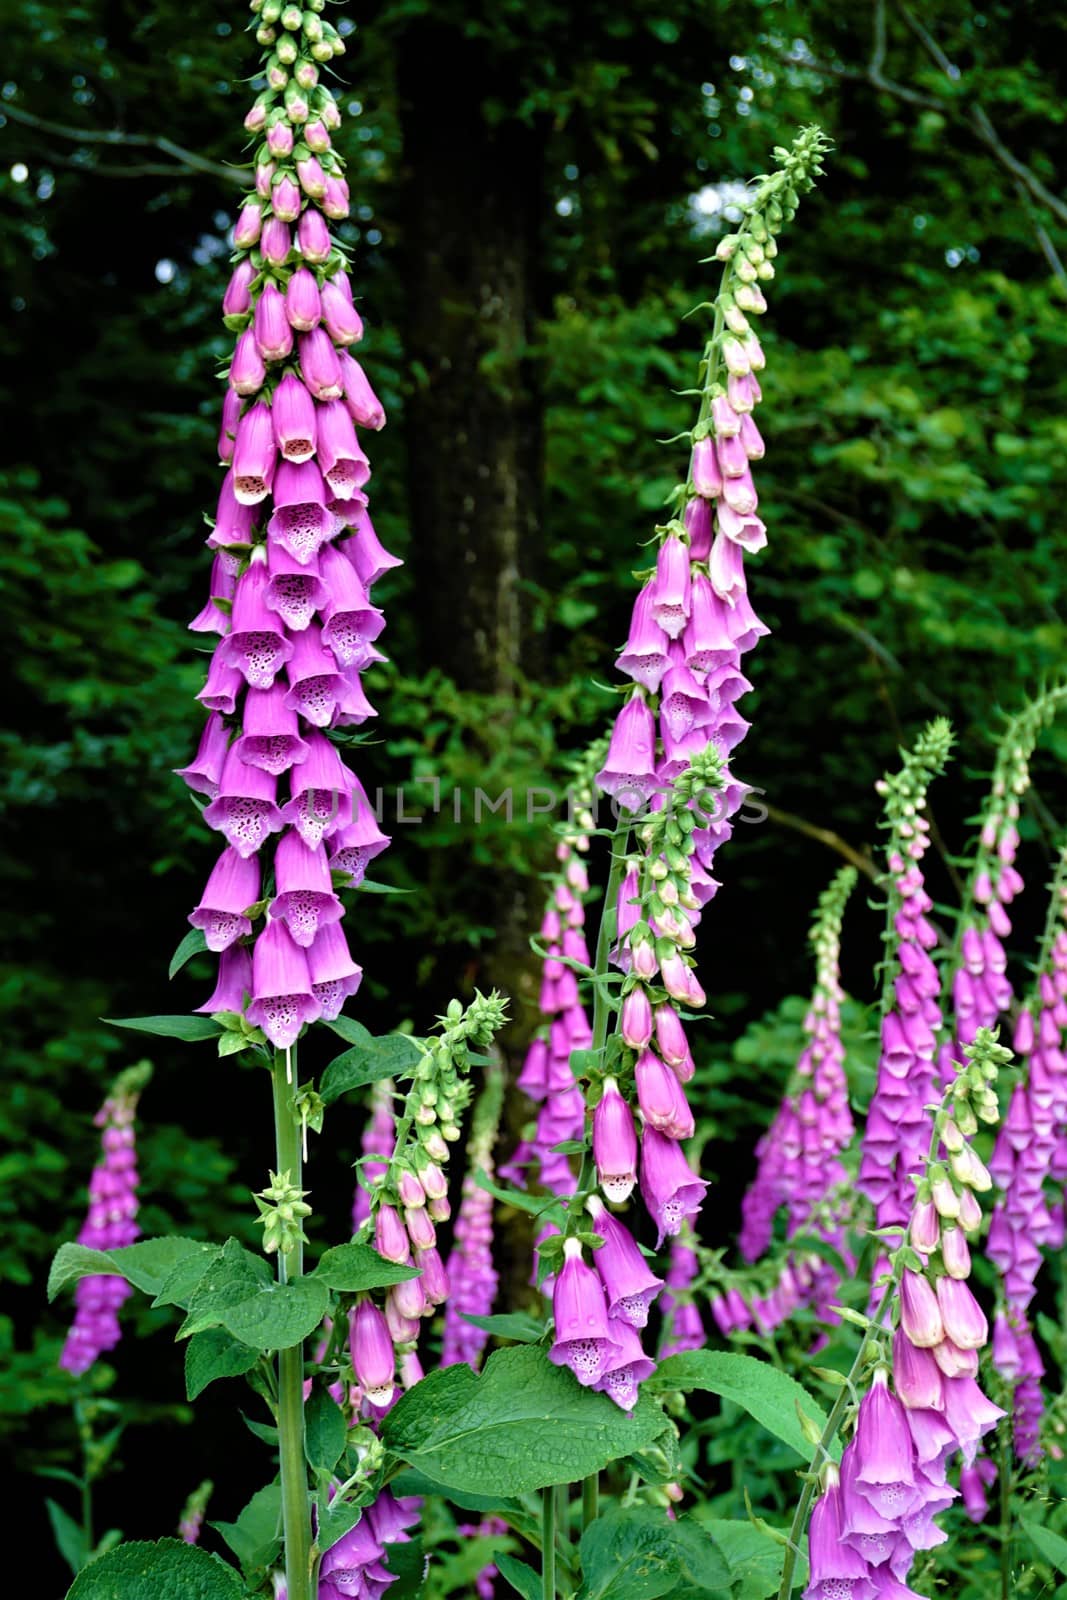 Some common foxgloves blooming in the forest by pisces2386